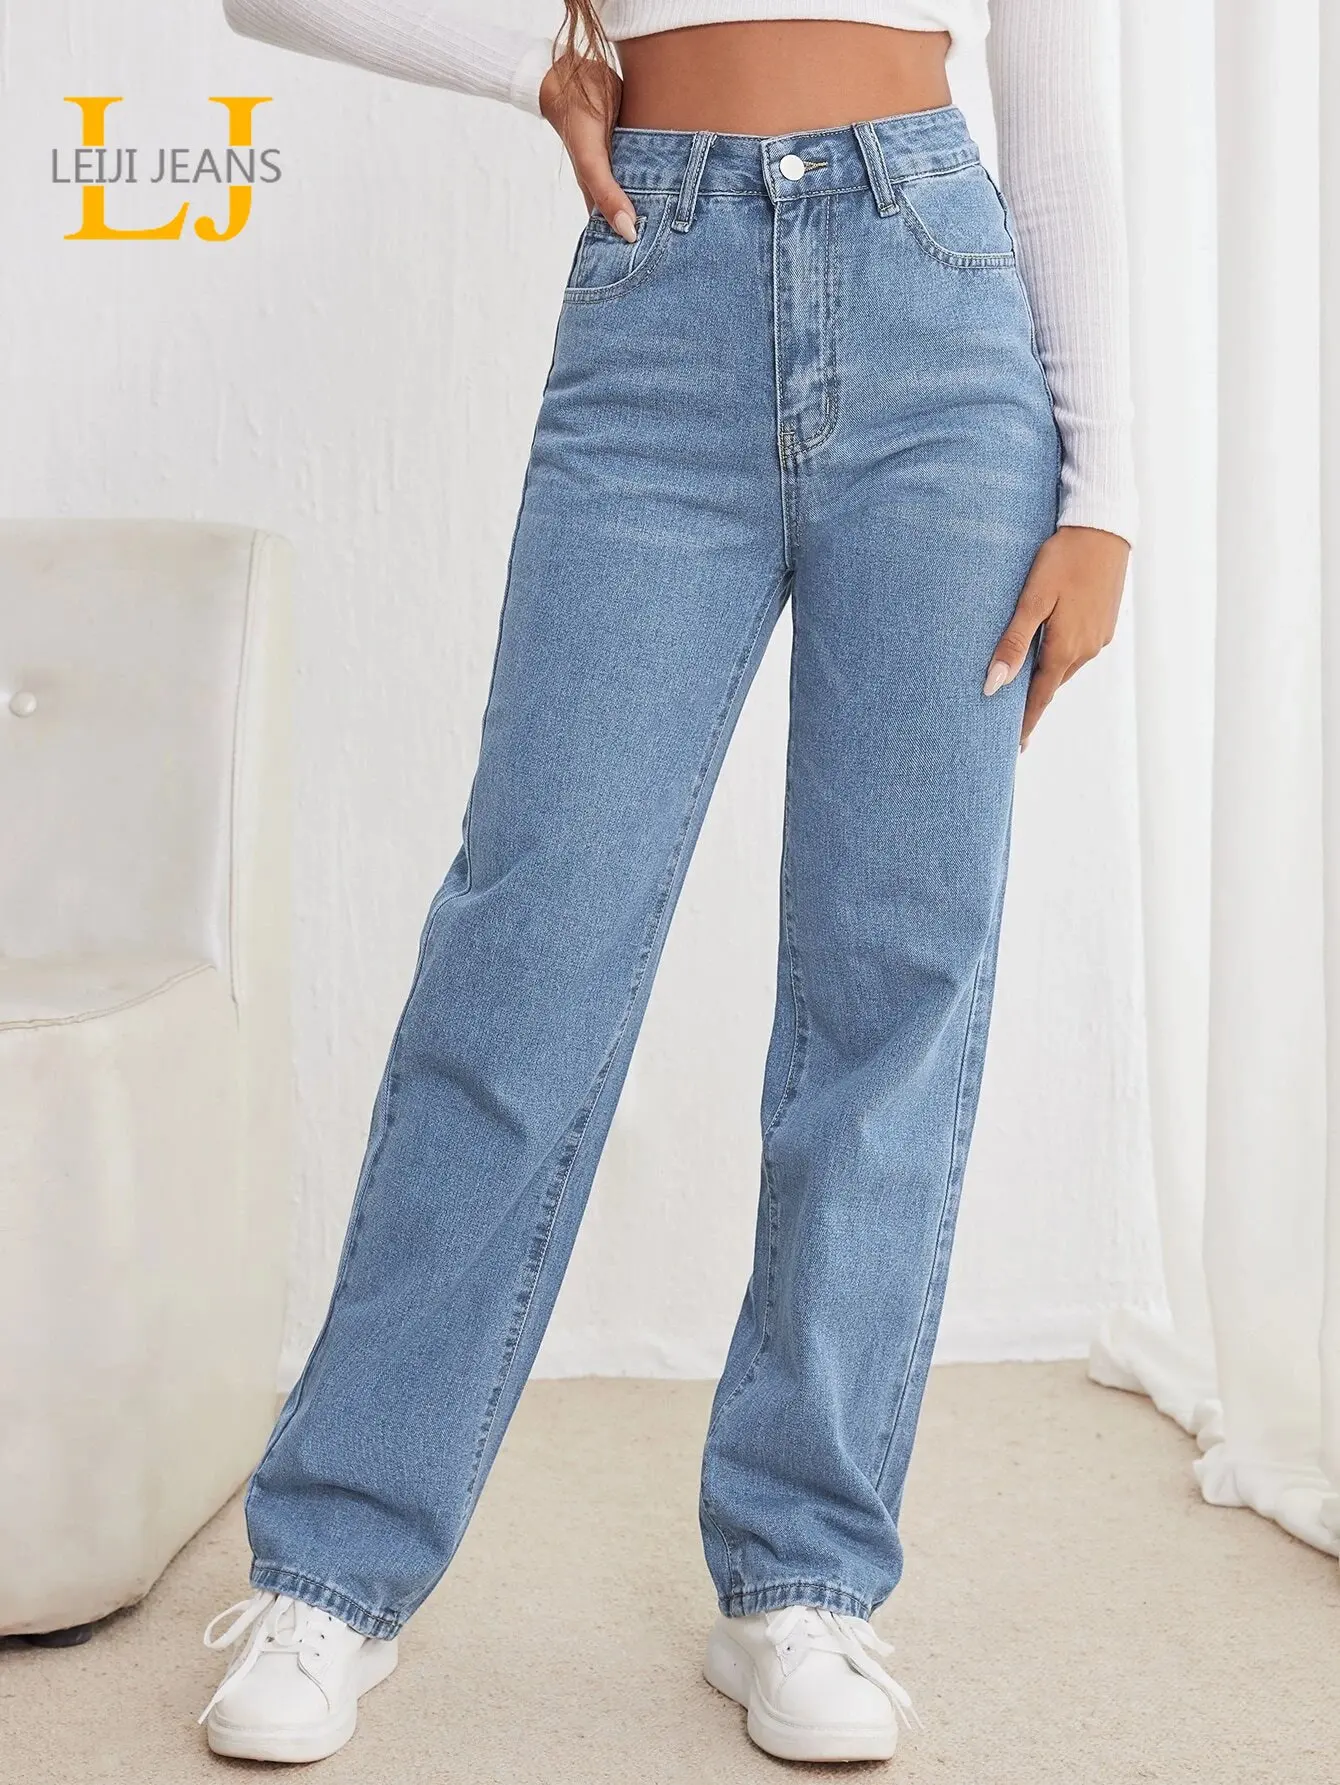 Plus Size Wide Leg Jeans for Women High Waist Stretchy Loose Fitting Denim Jeans Pants for Ladies 100kgs 175cms Tall Straight